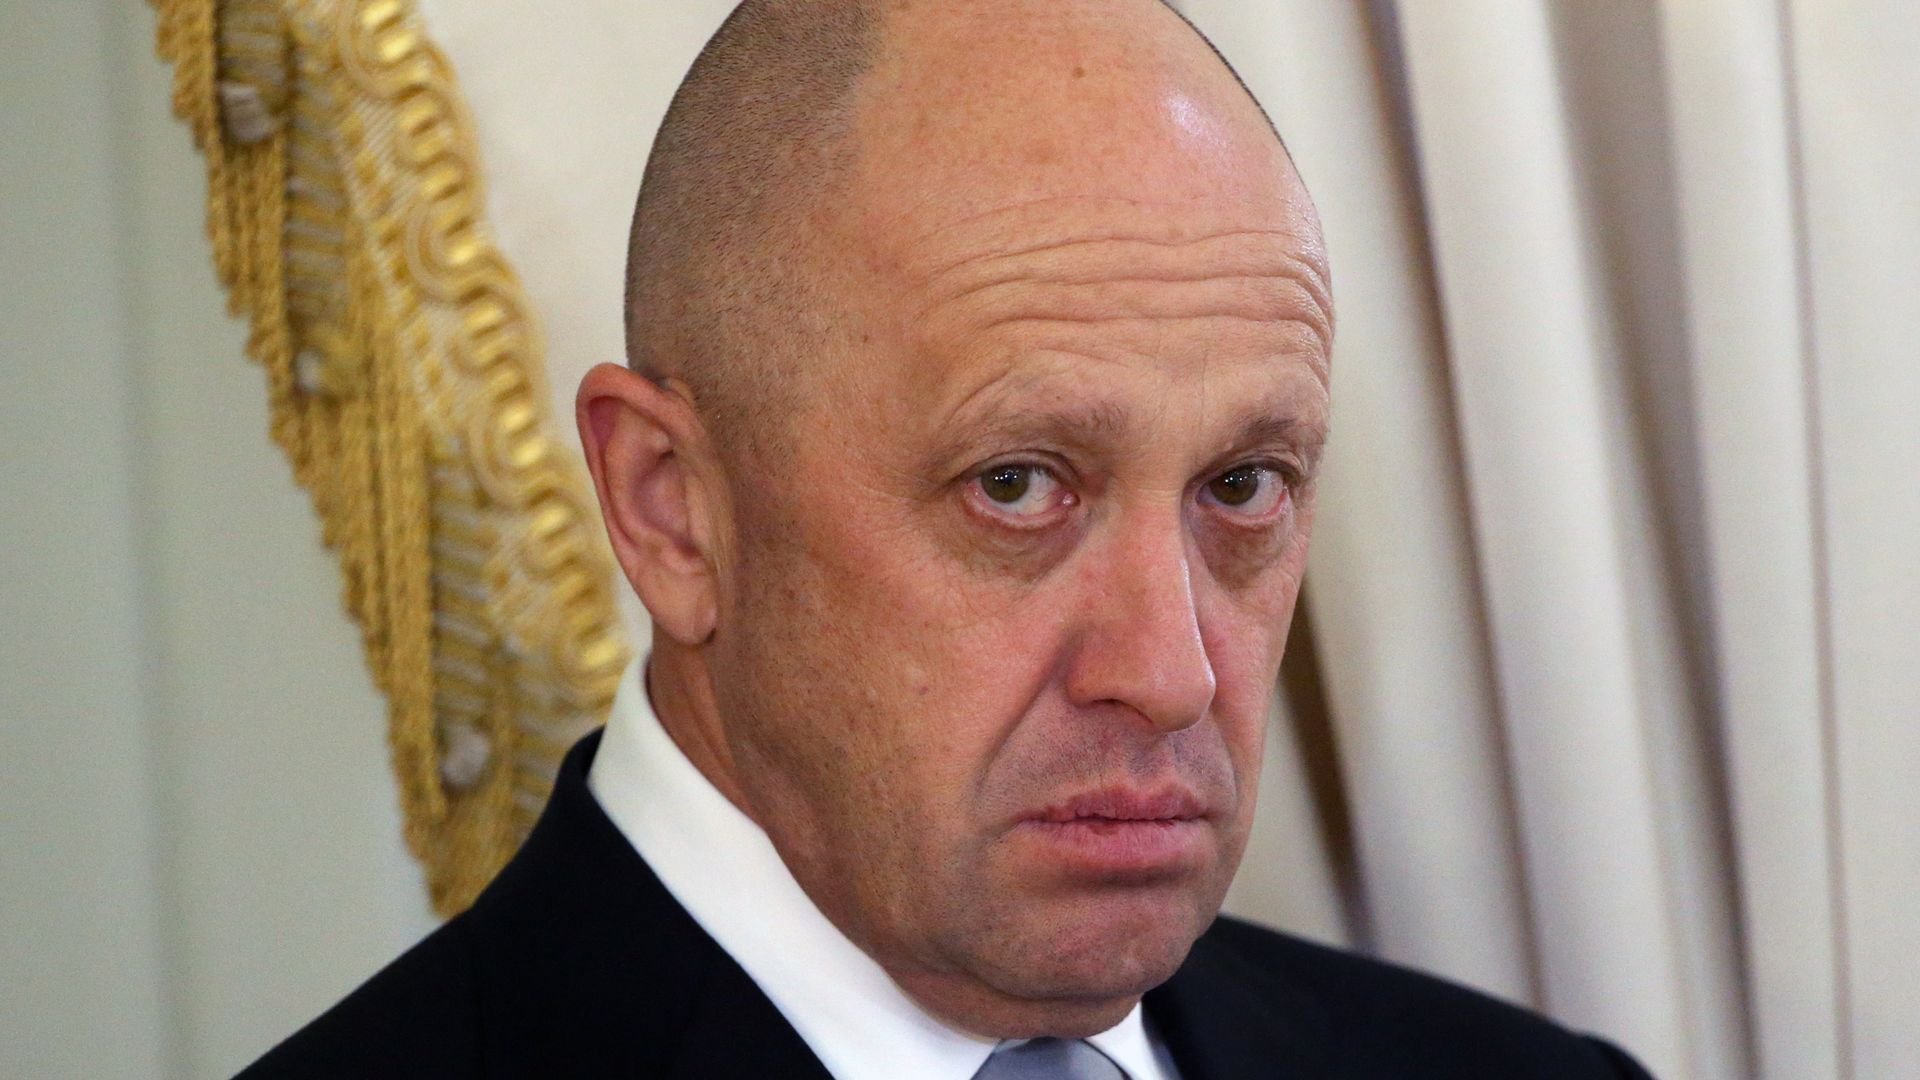 What to know about Wagner boss Yevgeny Prigozhin's presumed death